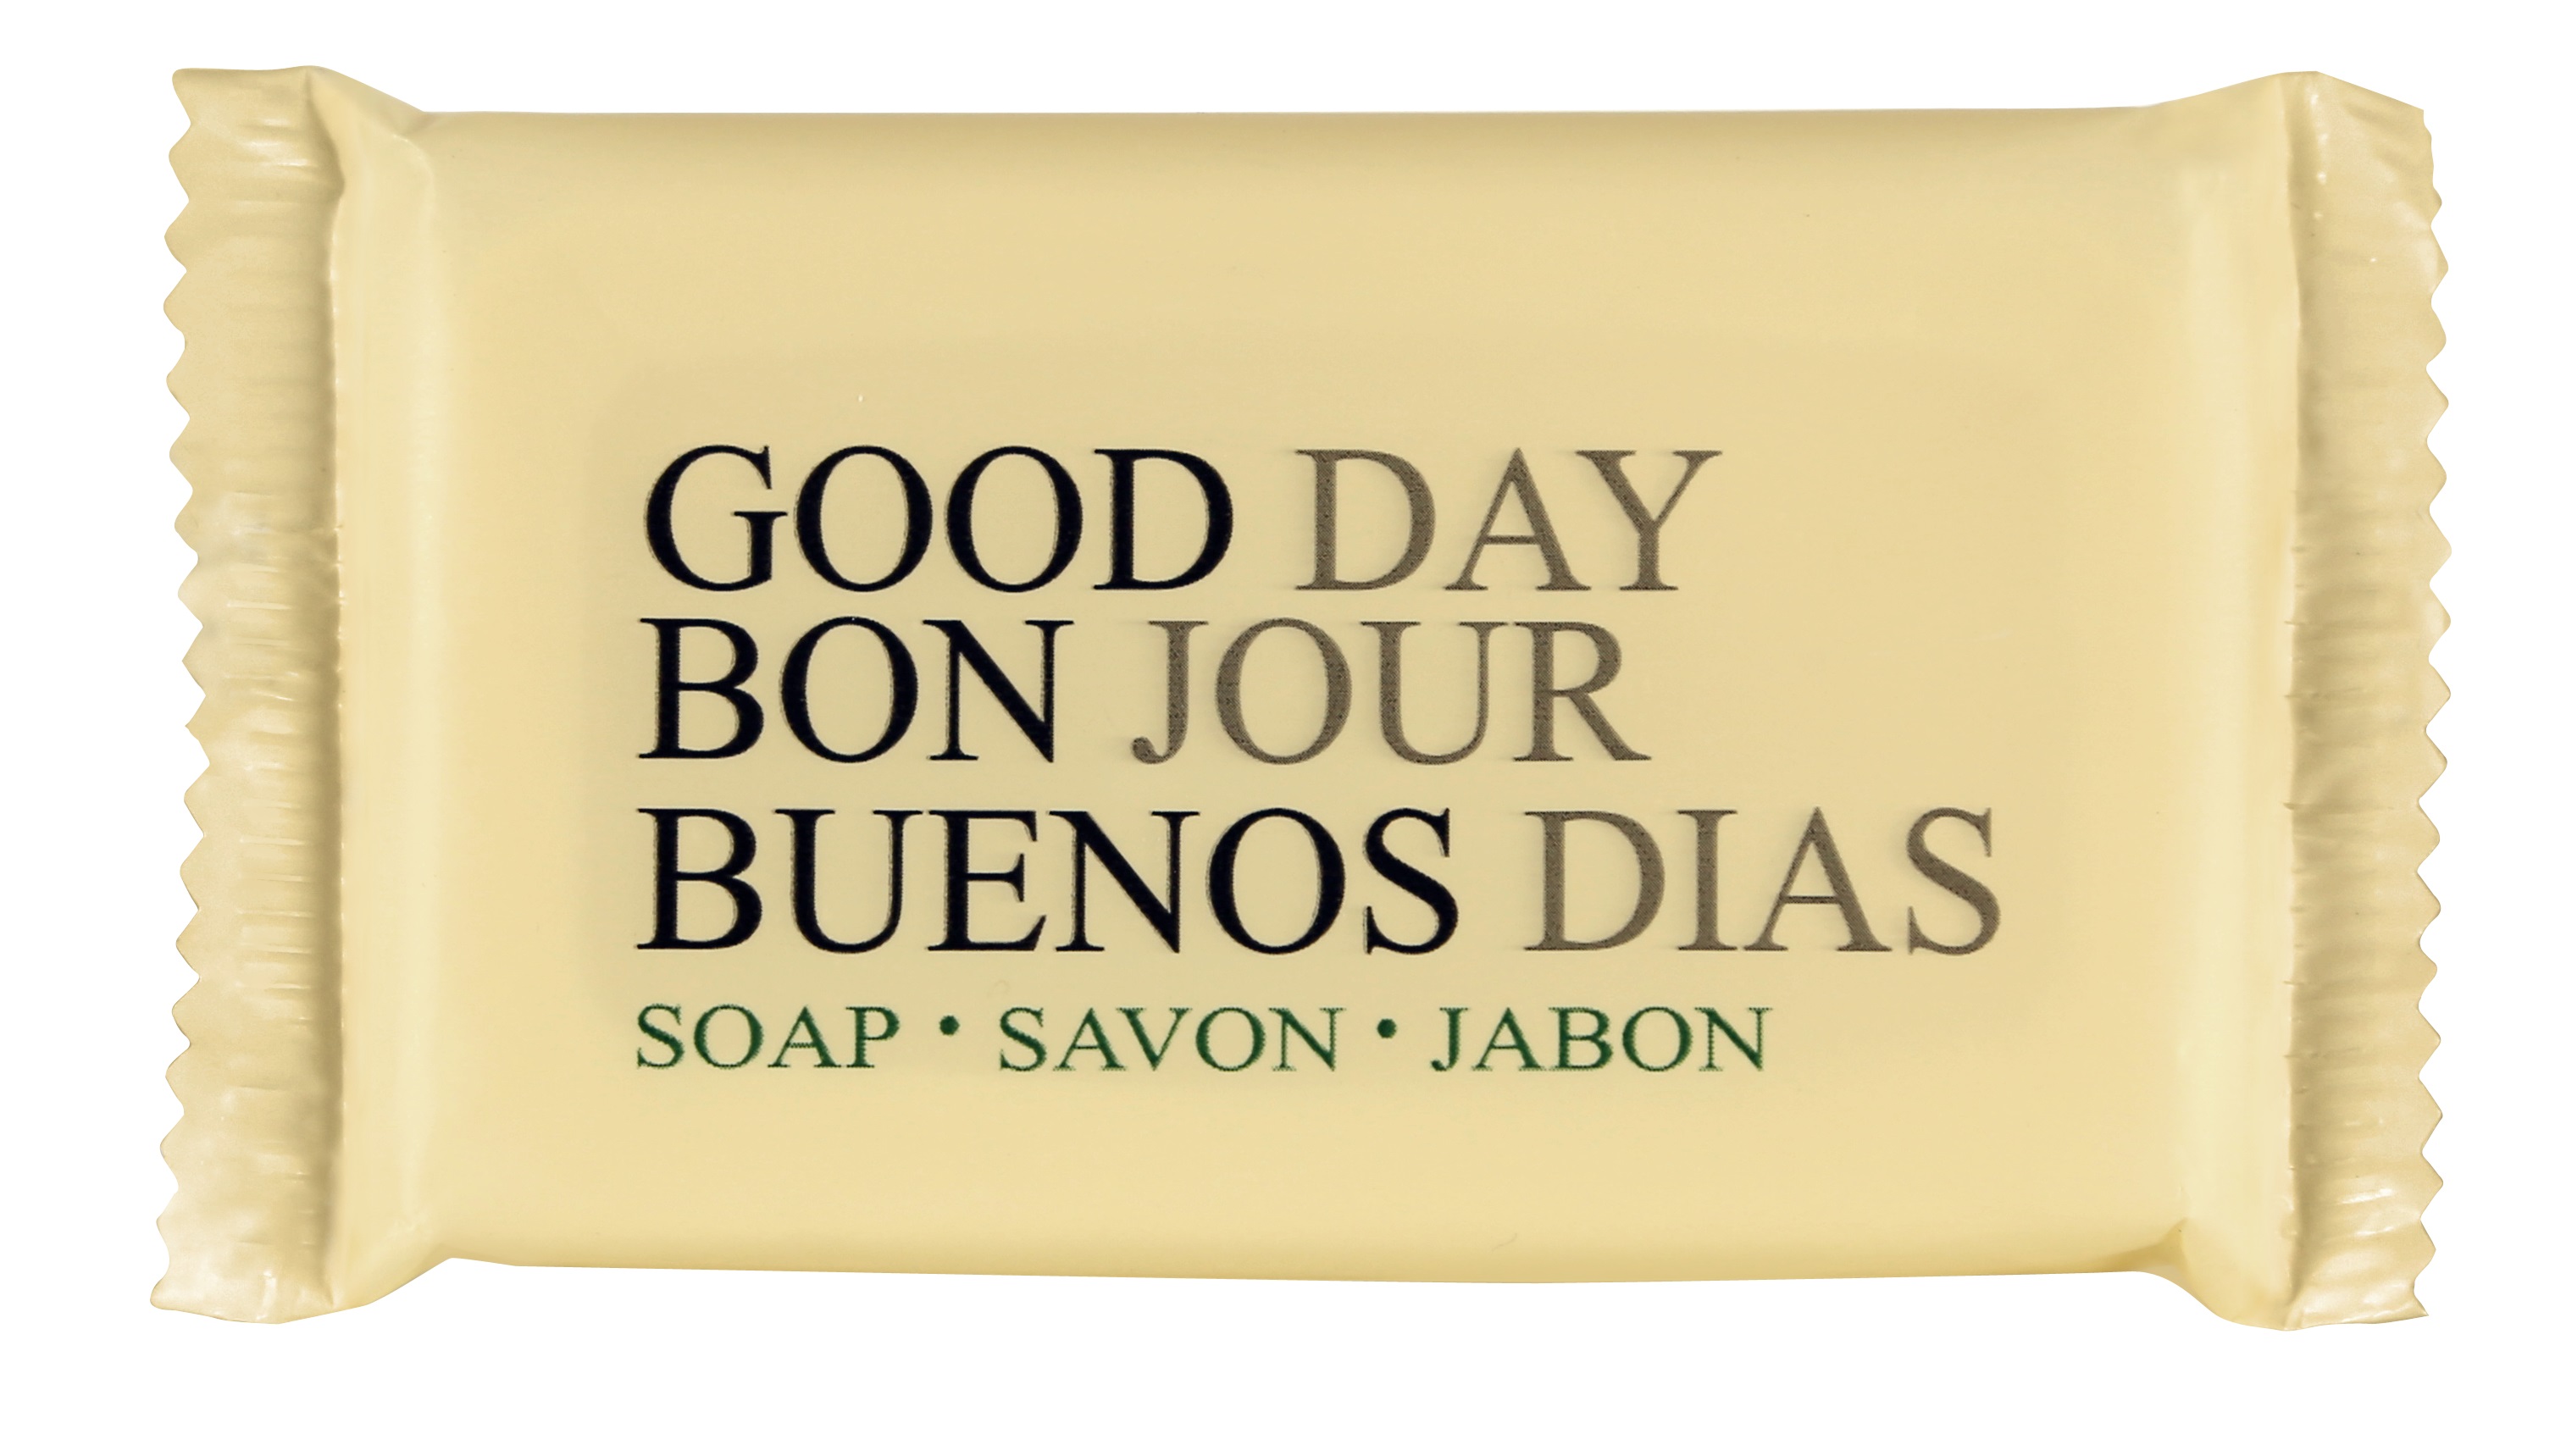 GOOD DAY BAR SOAP 1.5OZ INDIV WRAPPED (500/CS)